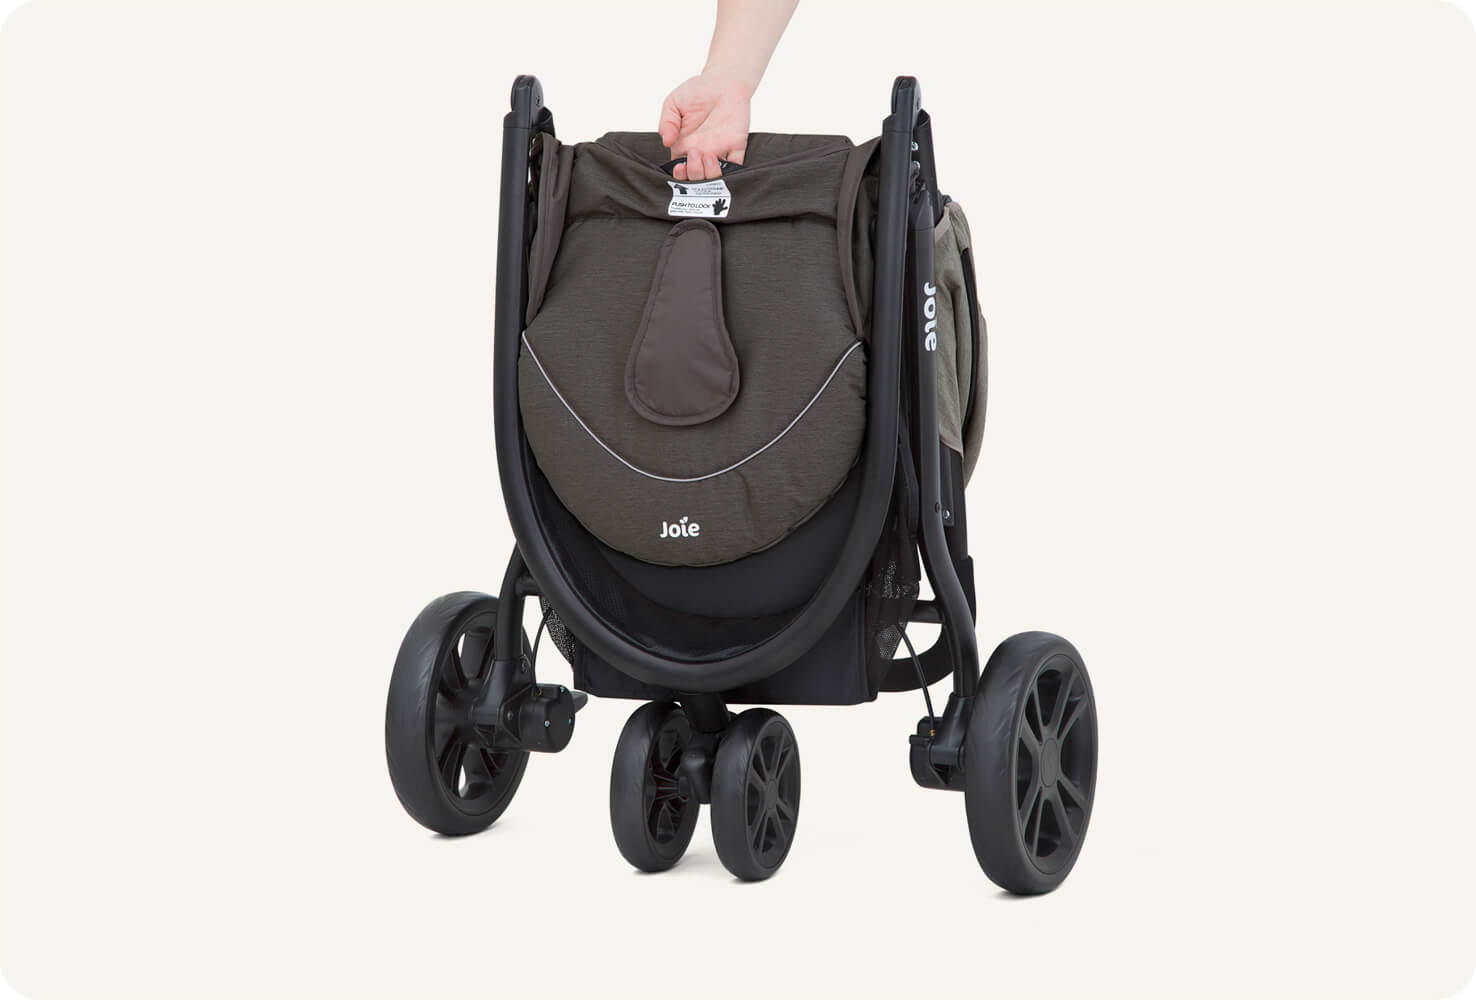   Joie litetrax 3 stroller folded at angle being held by a hand.